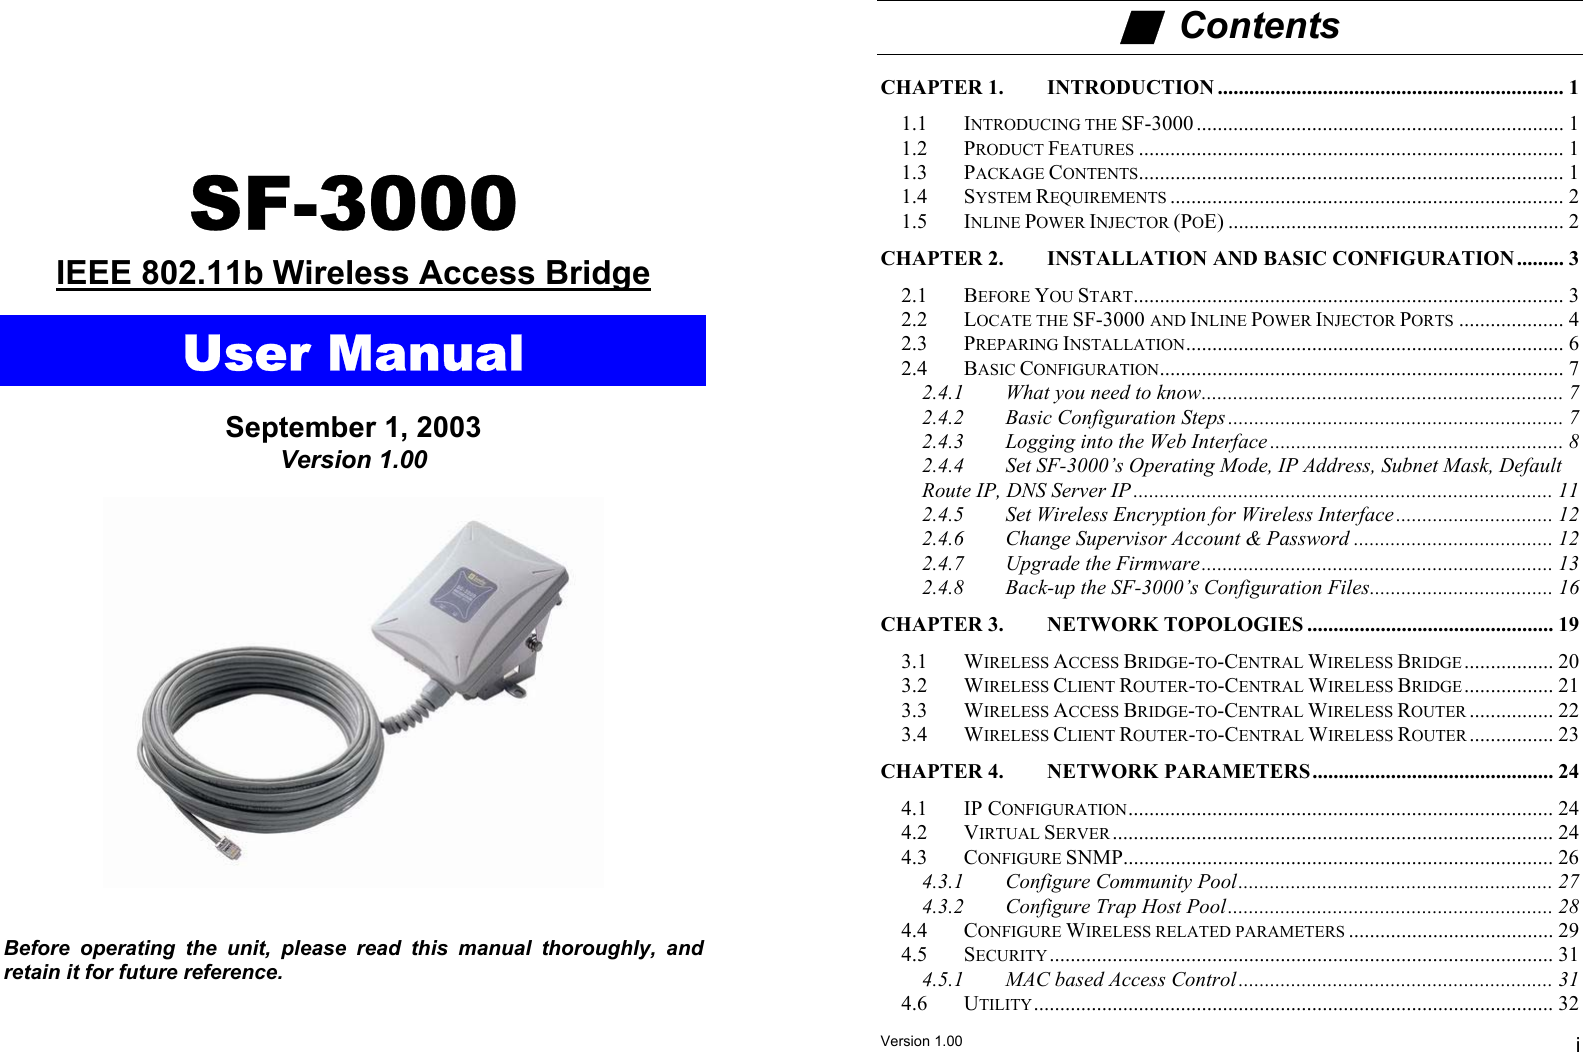  ■  Contents  CHAPTER 1. INTRODUCTION .................................................................. 1  1.1 INTRODUCING THE SF-3000 ...................................................................... 1 1.2 PRODUCT FEATURES ................................................................................. 1 SF-3000  1.3 PACKAGE CONTENTS................................................................................. 1 1.4 SYSTEM REQUIREMENTS ........................................................................... 2 1.5 INLINE POWER INJECTOR (POE) ................................................................ 2 CHAPTER 2. INSTALLATION AND BASIC CONFIGURATION ......... 3 IEEE 802.11b Wireless Access Bridge 2.1 BEFORE YOU START.................................................................................. 3  2.2 LOCATE THE SF-3000 AND INLINE POWER INJECTOR PORTS .................... 4 User Manual  2.3 PREPARING INSTALLATION........................................................................ 6 2.4 BASIC CONFIGURATION............................................................................. 7 2.4.1 What you need to know..................................................................... 7  2.4.2 Basic Configuration Steps ................................................................ 7 September 1, 2003  2.4.3 Logging into the Web Interface ........................................................ 8 Version 1.00  2.4.4 Set SF-3000’s Operating Mode, IP Address, Subnet Mask, Default Route IP, DNS Server IP ................................................................................ 11  2.4.5 Set Wireless Encryption for Wireless Interface .............................. 12  2.4.6 Change Supervisor Account &amp; Password ...................................... 12 2.4.7 Upgrade the Firmware................................................................... 13 2.4.8 Back-up the SF-3000’s Configuration Files................................... 16 CHAPTER 3. NETWORK TOPOLOGIES ............................................... 19 3.1 WIRELESS ACCESS BRIDGE-TO-CENTRAL WIRELESS BRIDGE ................. 20 3.2 WIRELESS CLIENT ROUTER-TO-CENTRAL WIRELESS BRIDGE................. 21 3.3 WIRELESS ACCESS BRIDGE-TO-CENTRAL WIRELESS ROUTER ................ 22 3.4 WIRELESS CLIENT ROUTER-TO-CENTRAL WIRELESS ROUTER ................ 23 CHAPTER 4. NETWORK PARAMETERS .............................................. 24 4.1 IP CONFIGURATION................................................................................. 24 4.2 VIRTUAL SERVER .................................................................................... 24 4.3 CONFIGURE SNMP.................................................................................. 26 4.3.1 Configure Community Pool............................................................ 27 4.3.2 Configure Trap Host Pool.............................................................. 28 4.4 CONFIGURE WIRELESS RELATED PARAMETERS ....................................... 29 4.5 SECURITY................................................................................................ 31 4.5.1 MAC based Access Control ............................................................ 31 4.6 UTILITY................................................................................................... 32   Before operating the unit, please read this manual thoroughly, and retain it for future reference.  Version 1.00  i